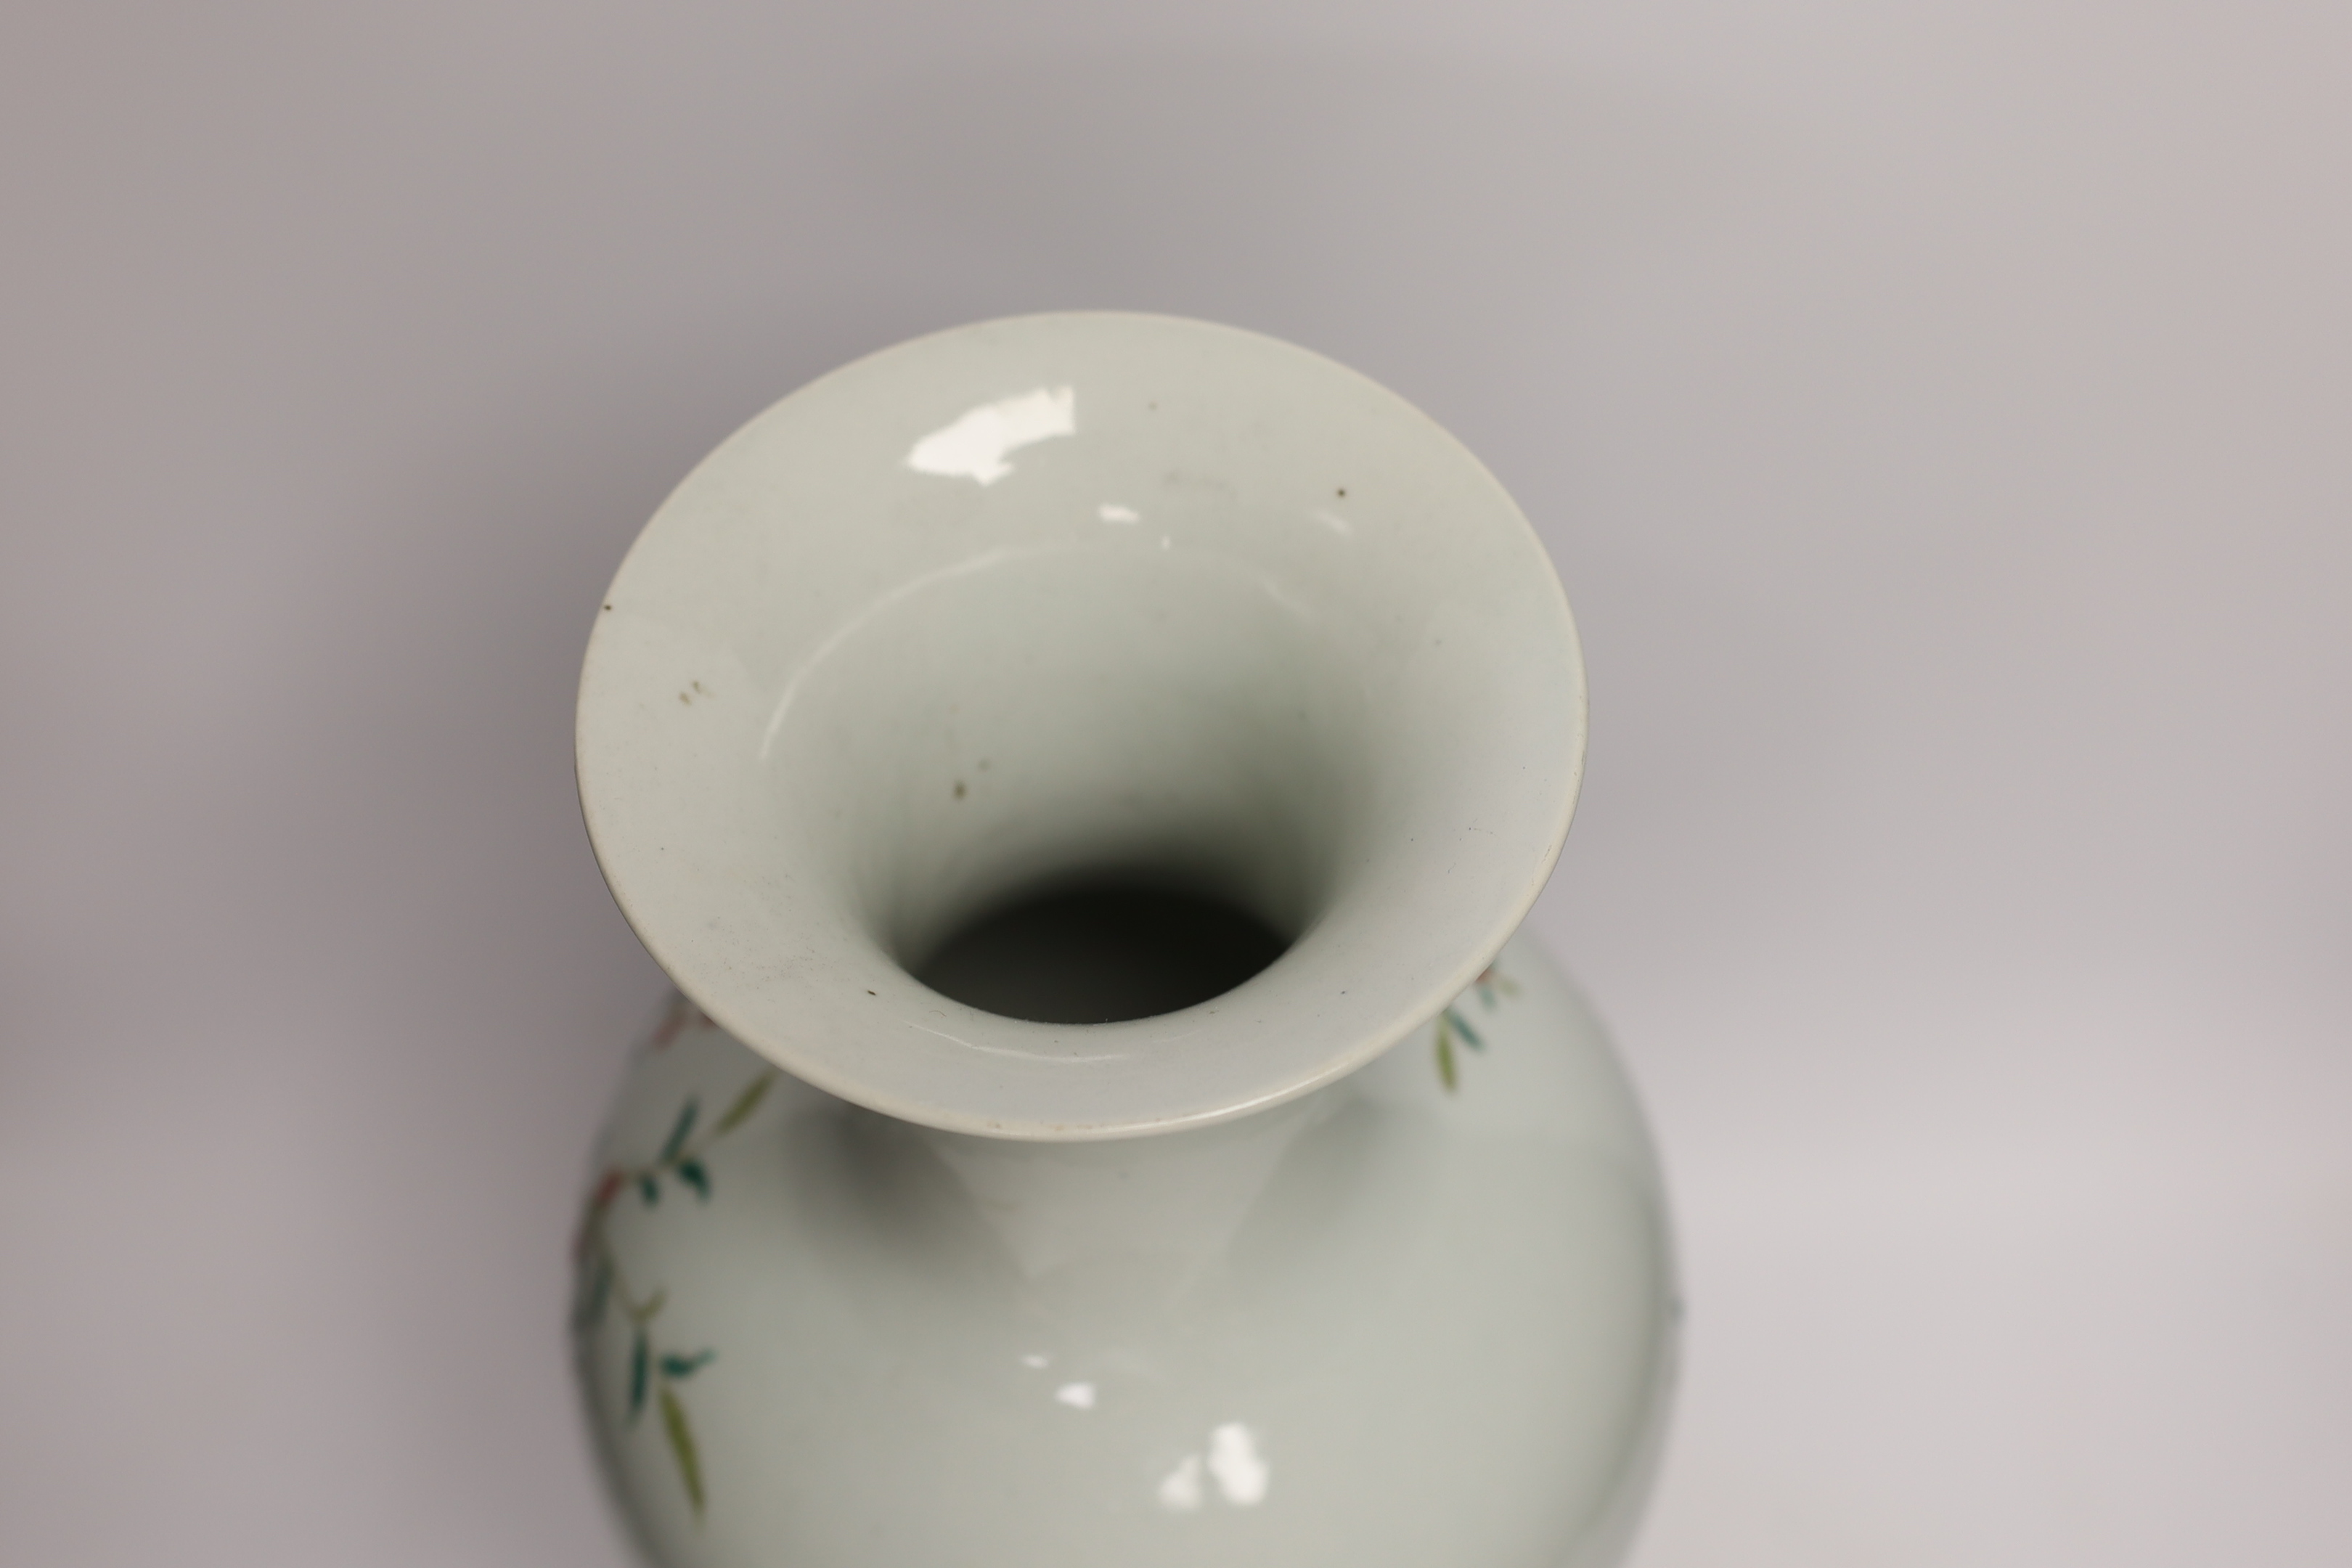 A large Chinese famille rose vase, late 19th century, neck restored, 46cm high